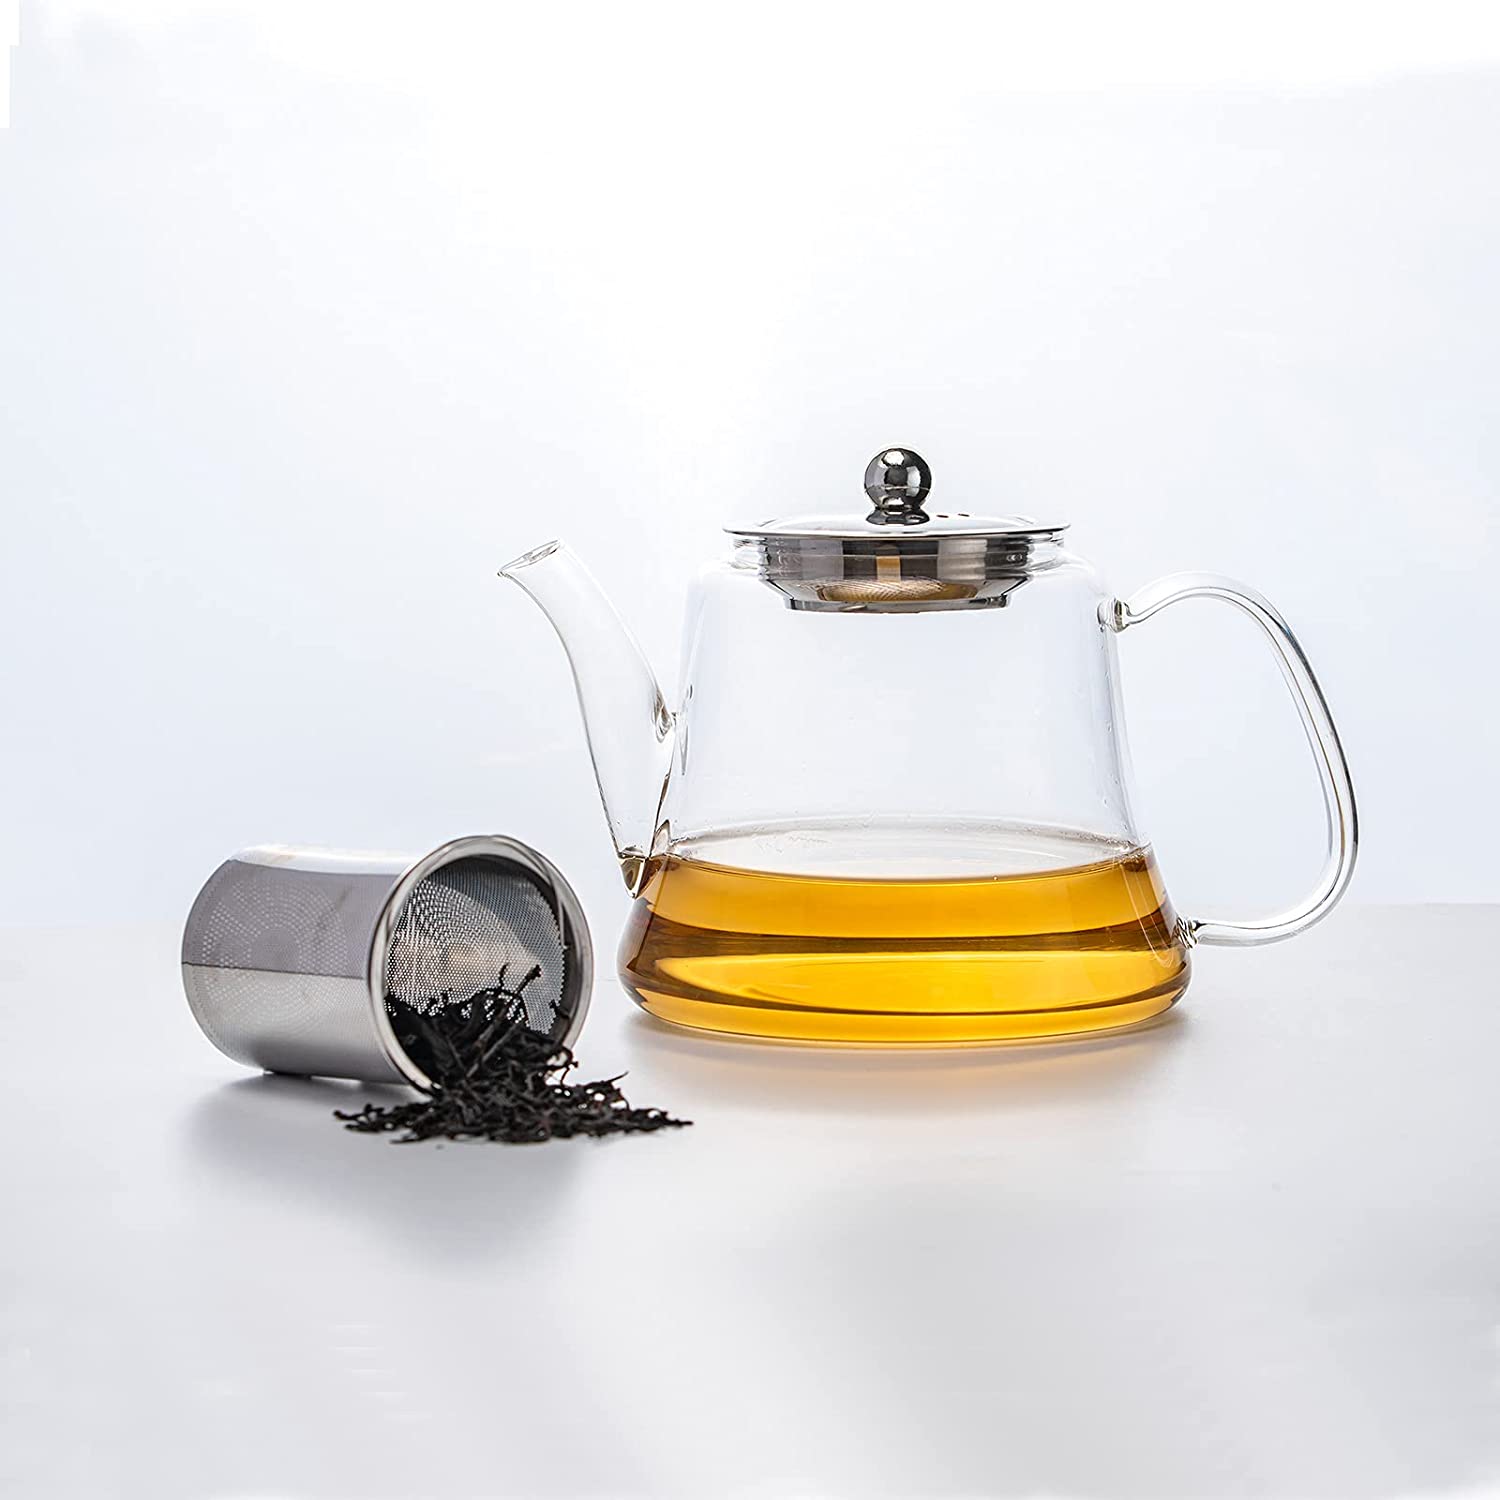 Inavis 1000ml Glass Teapot with Removable Infuser Tea Kettle for Stove - Perfect for Blooming and Loose Tea